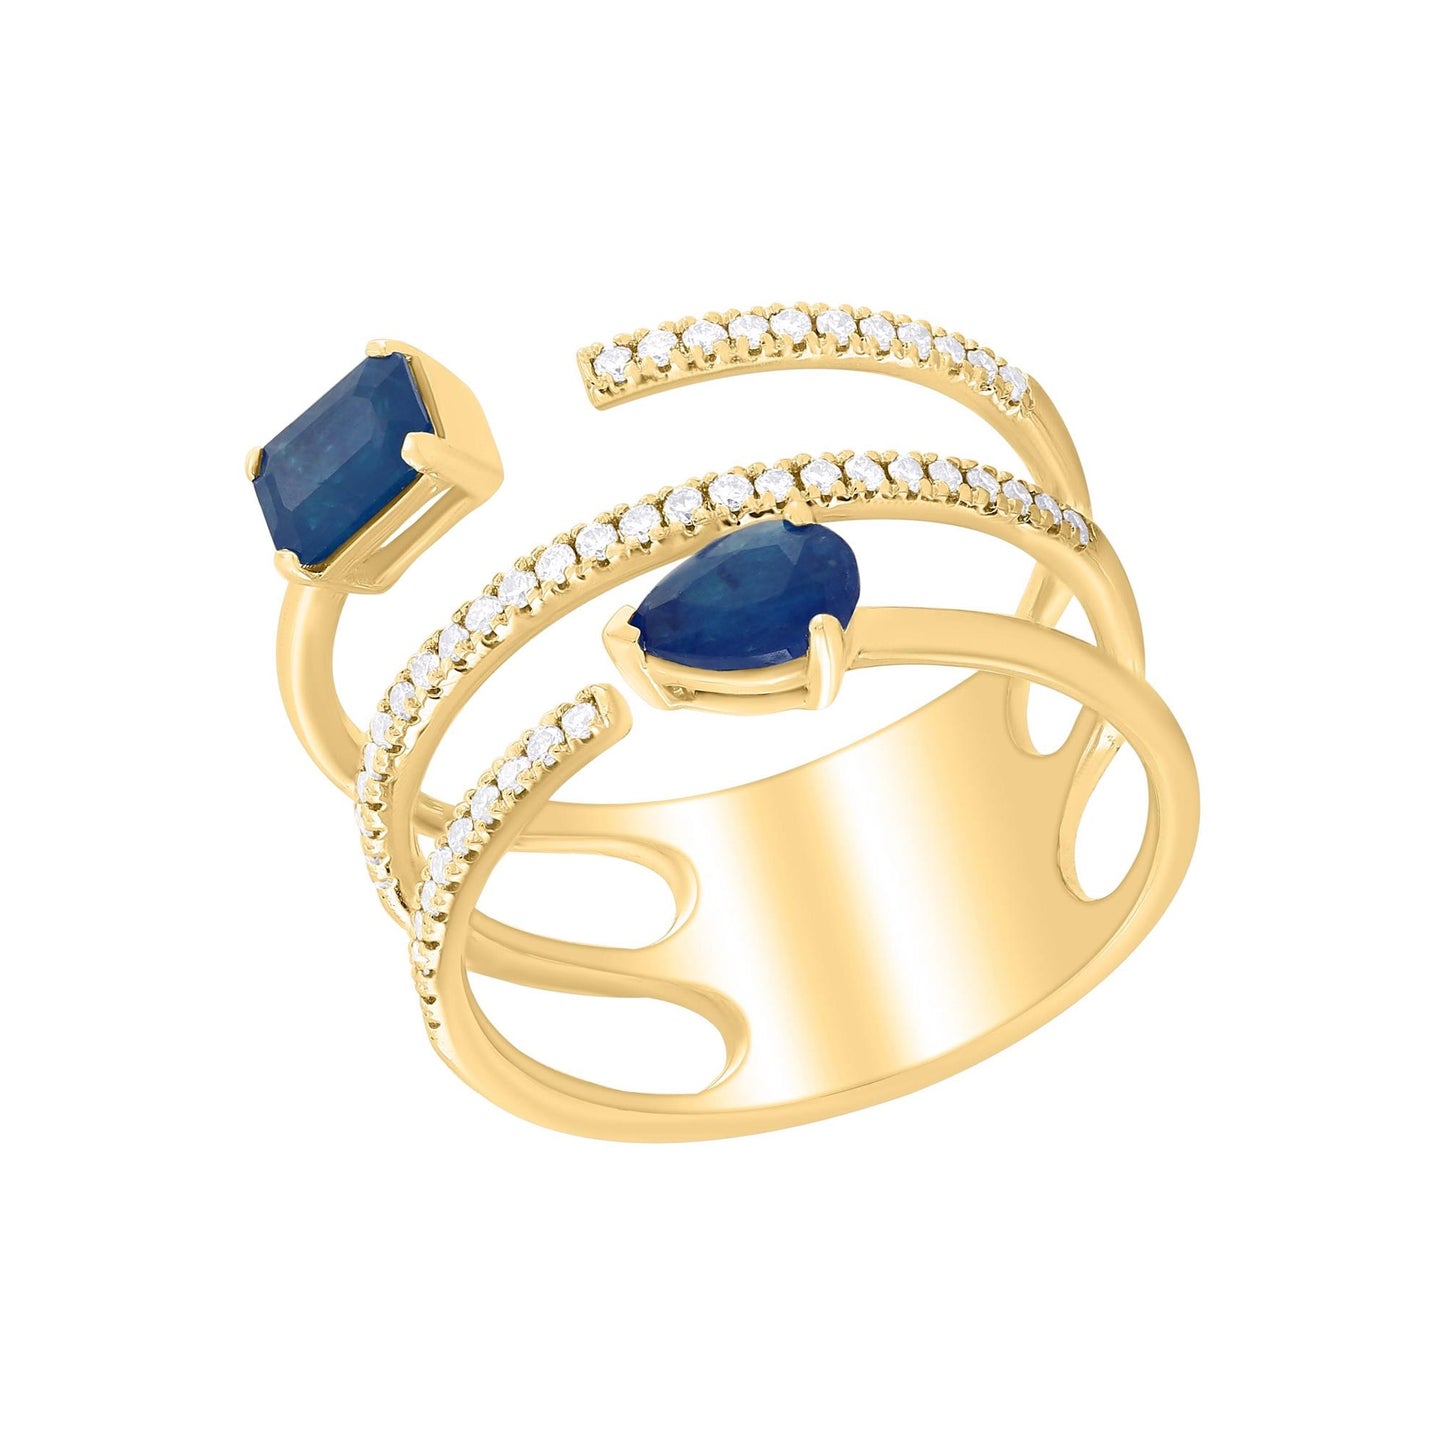 Diamond "You and Me" Ring in 14 Karat Gold